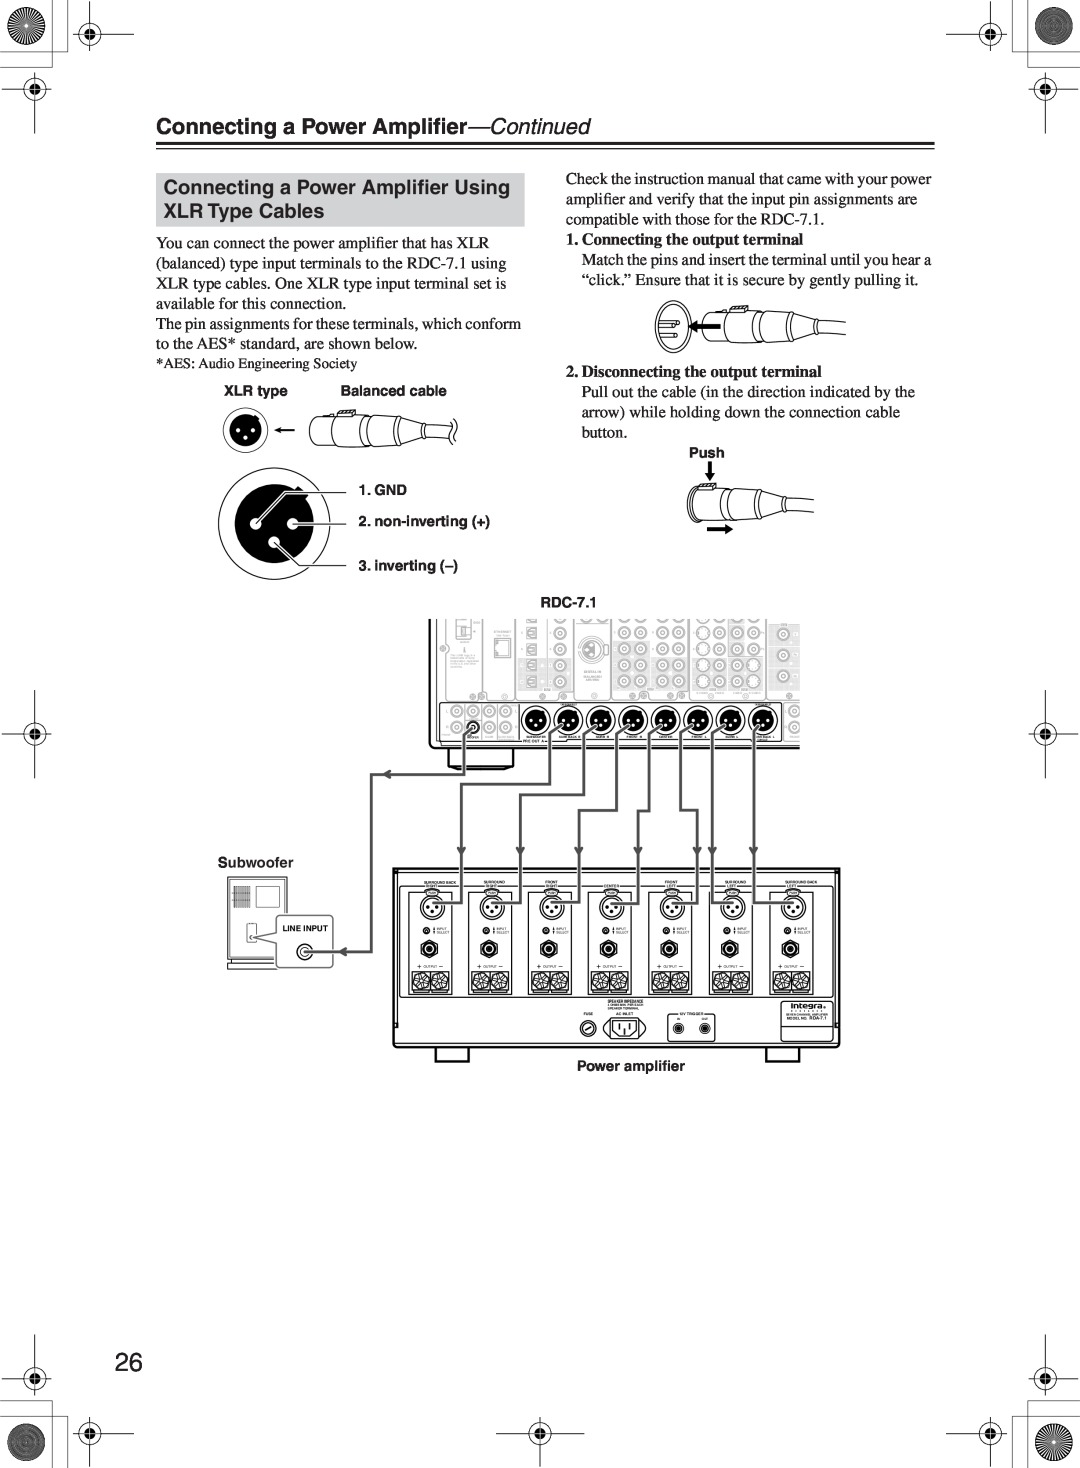 Integra RDC-7.1 instruction manual Connecting a Power Ampliﬁer—Continued, Connecting a Power Ampliﬁer Using XLR Type Cables 